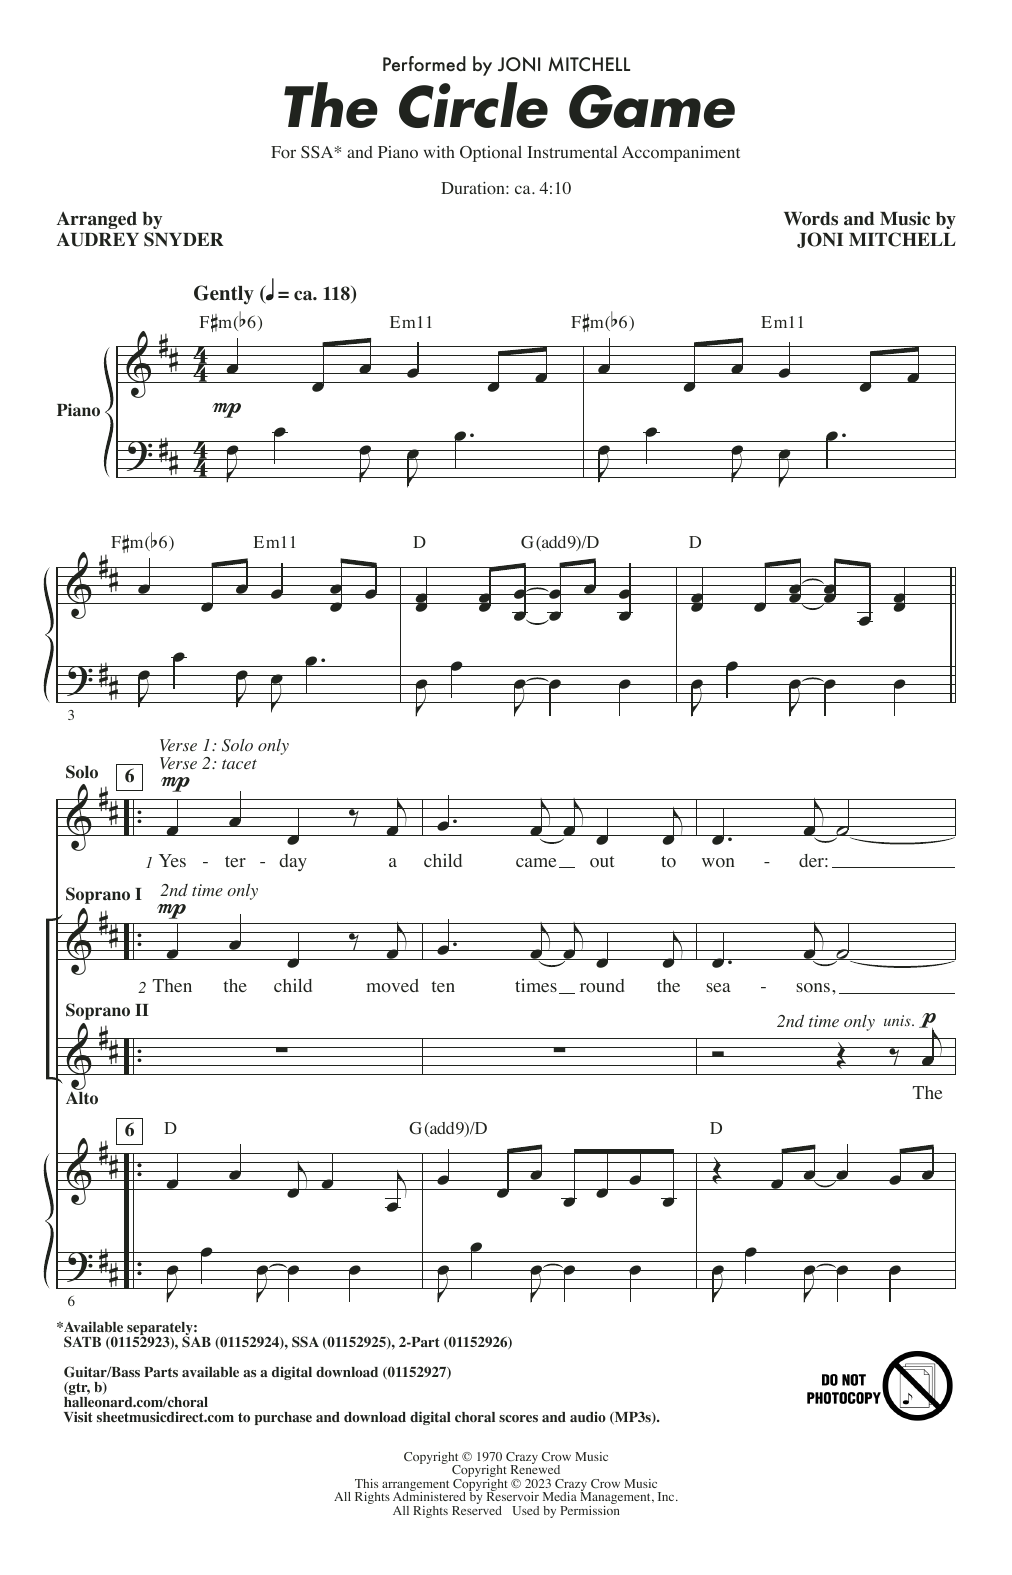 Joni Mitchell The Circle Game (arr. Audrey Snyder) sheet music notes printable PDF score